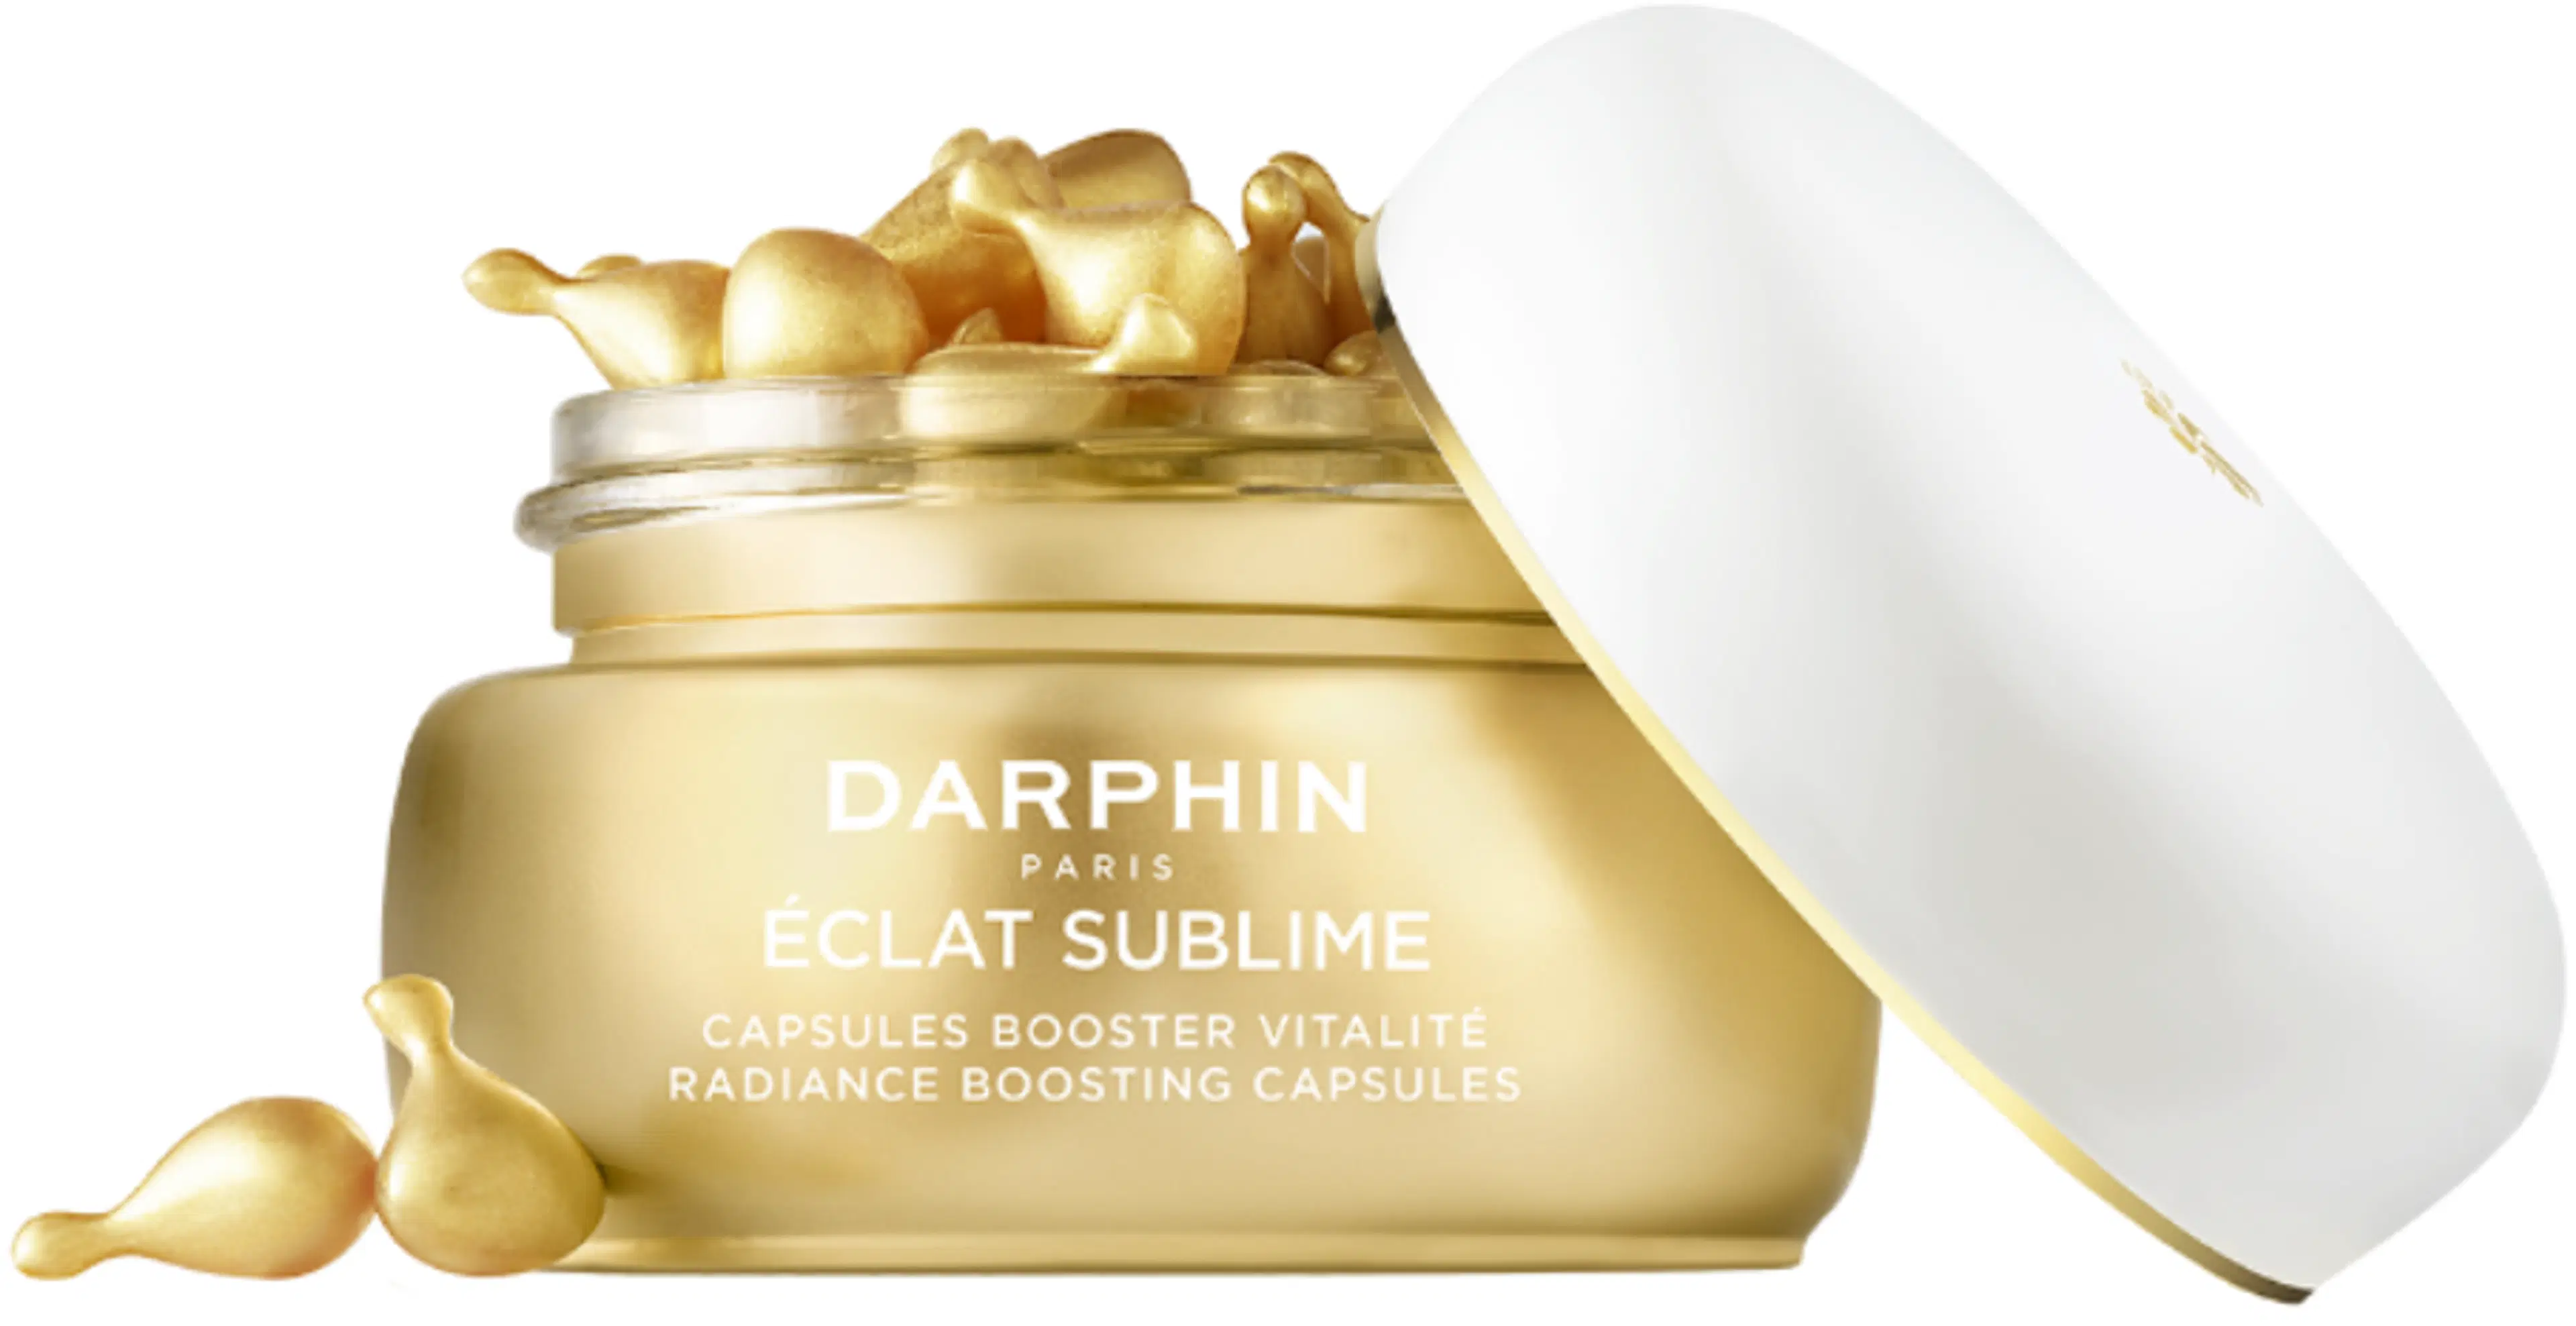 Darphin Eclat sublime radiance boosting capsules with pro-vitamin C & E, 60 kpl